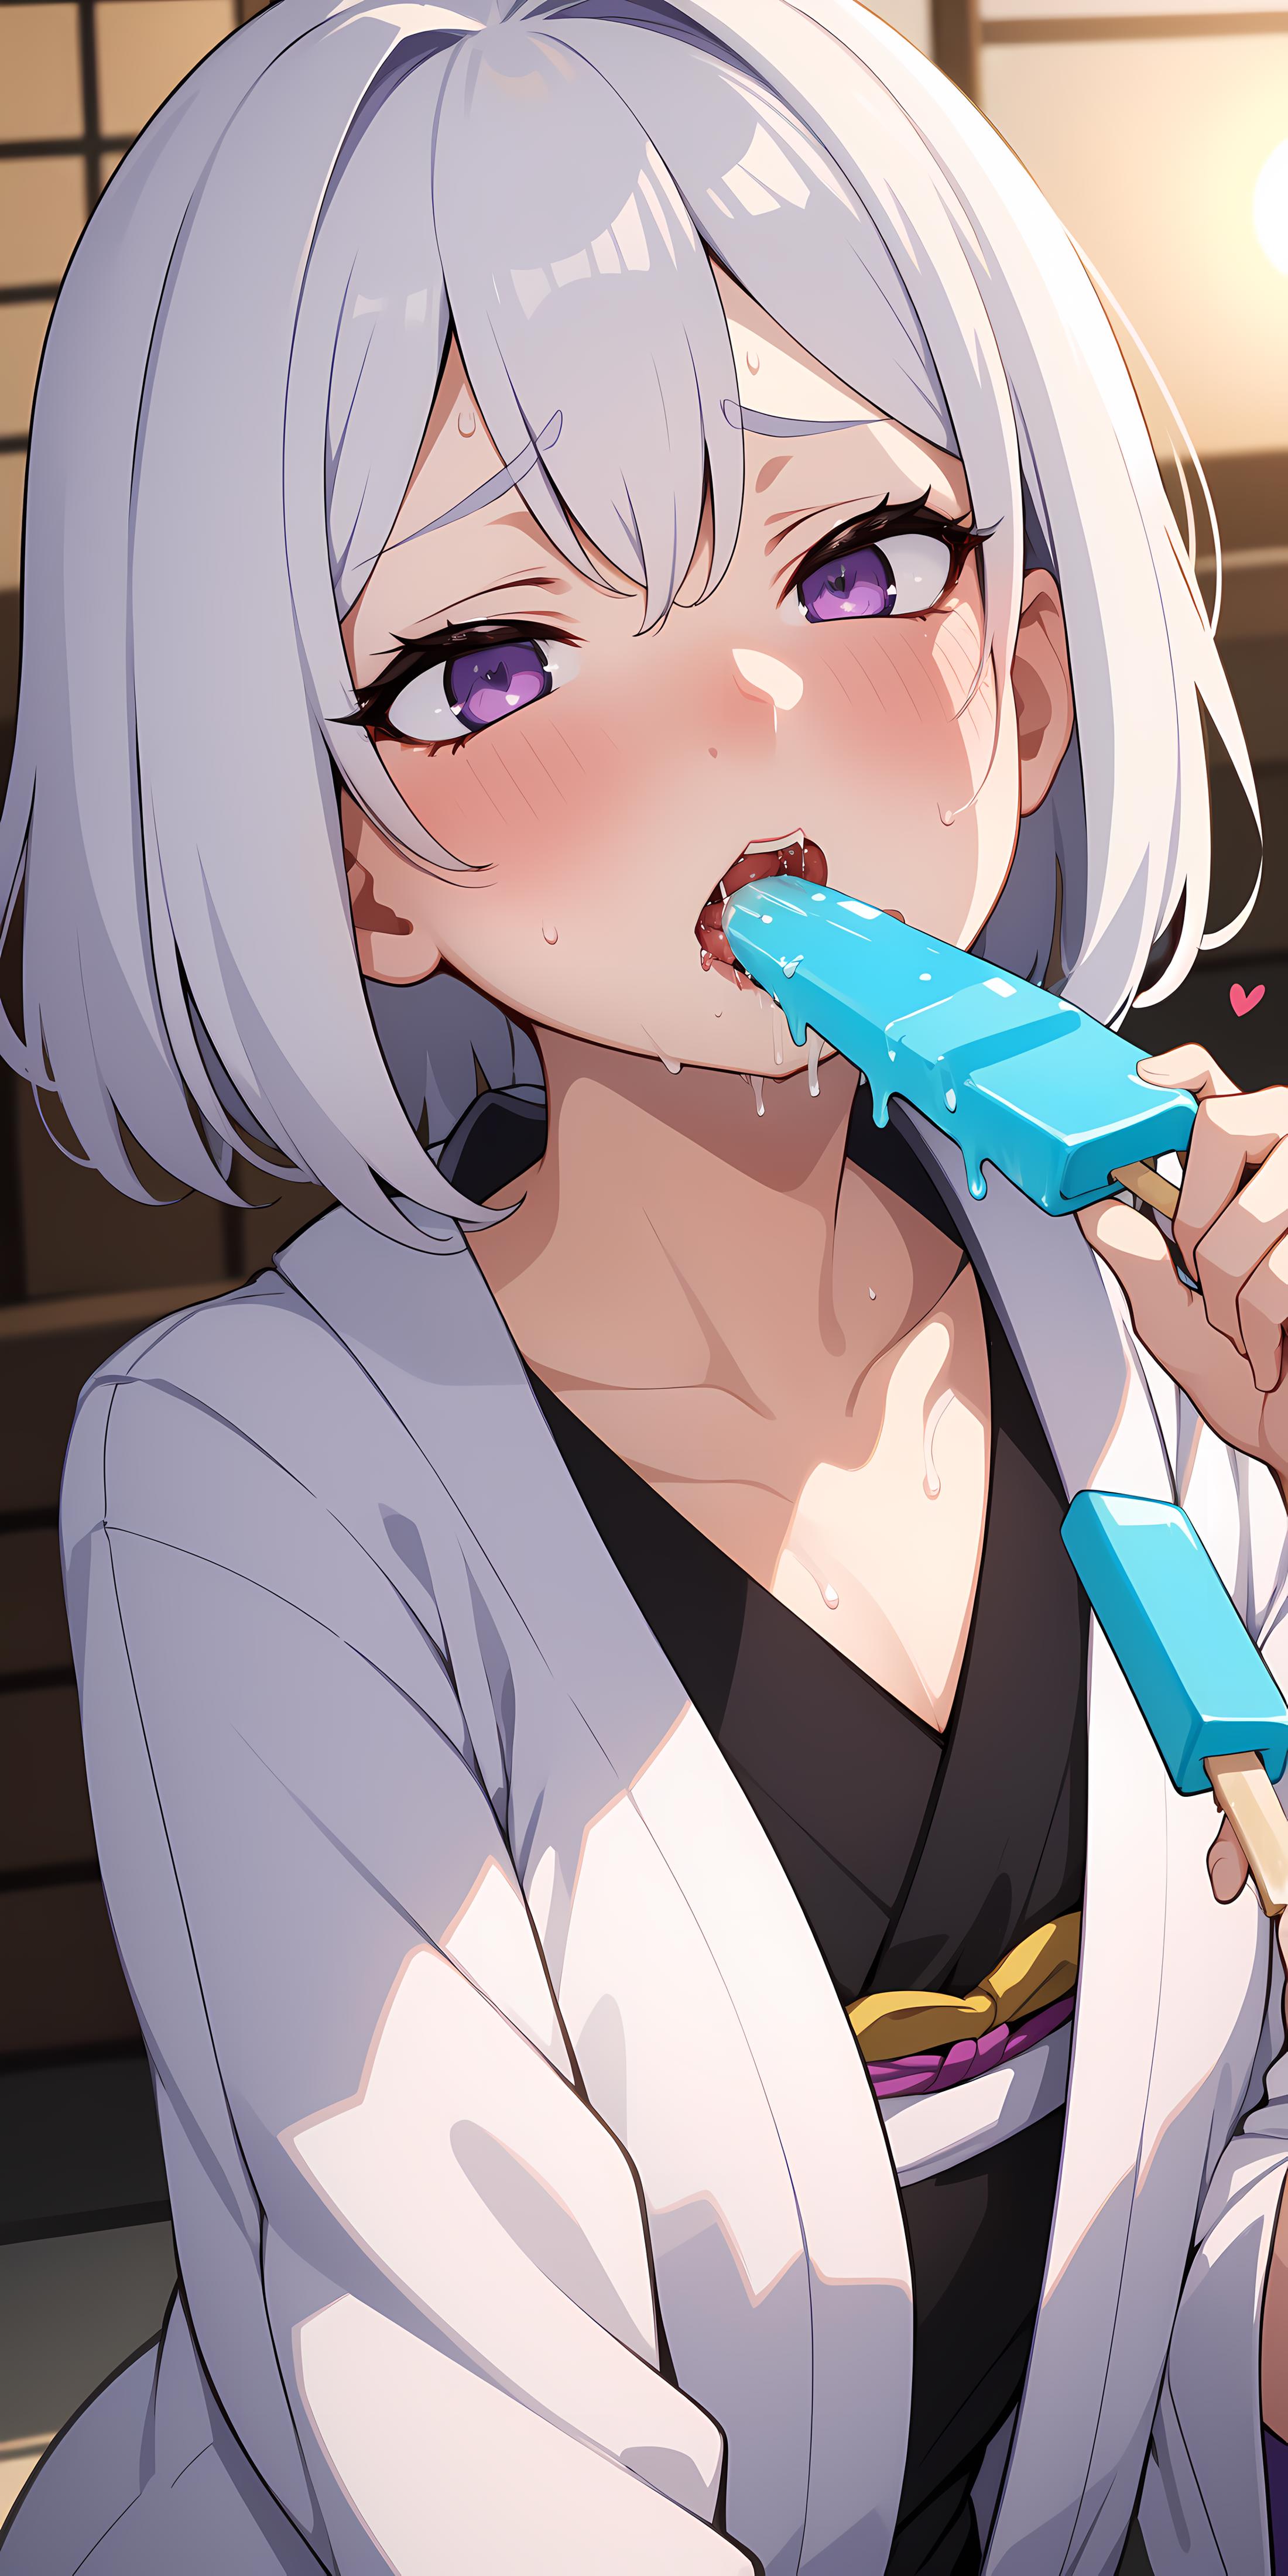 A woman in a white shirt is licking a blue popsicle.